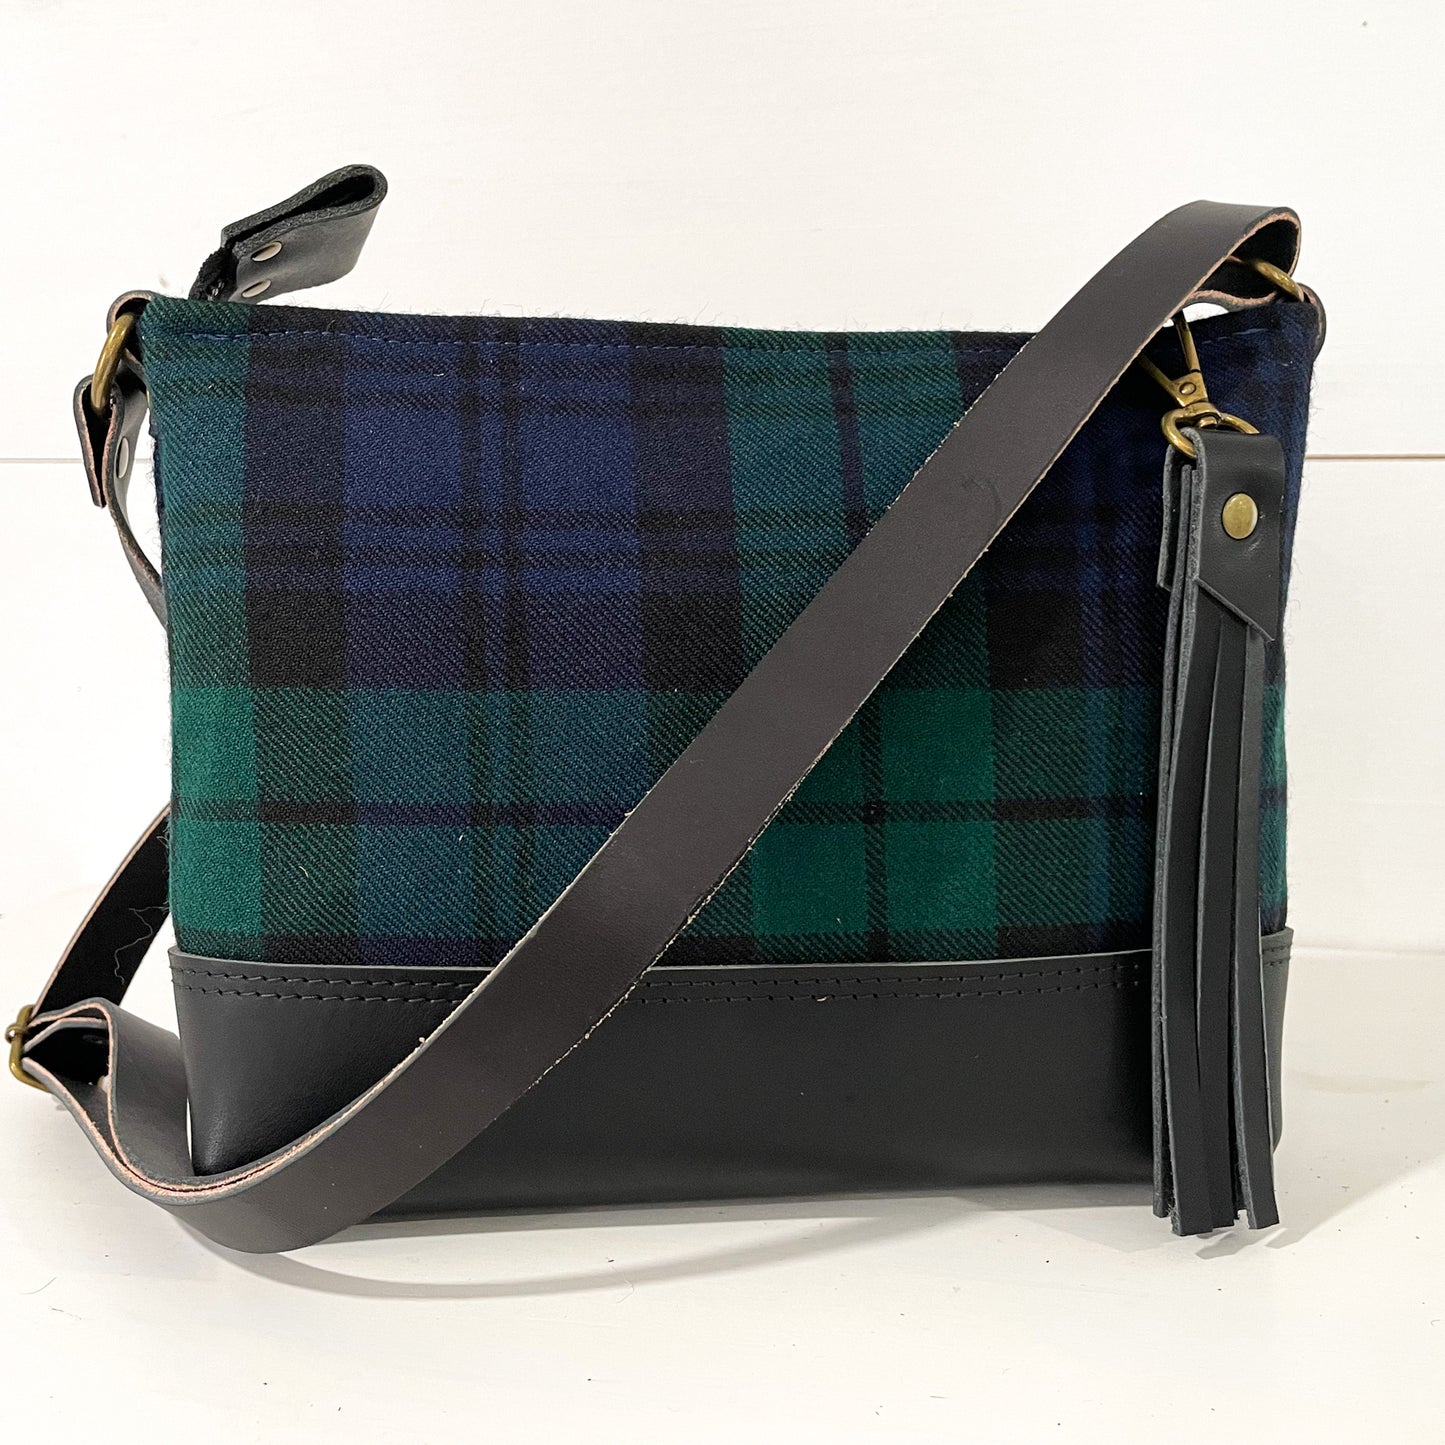 Wee Bag - Black Watch/Navy Blue - READY TO SHIP